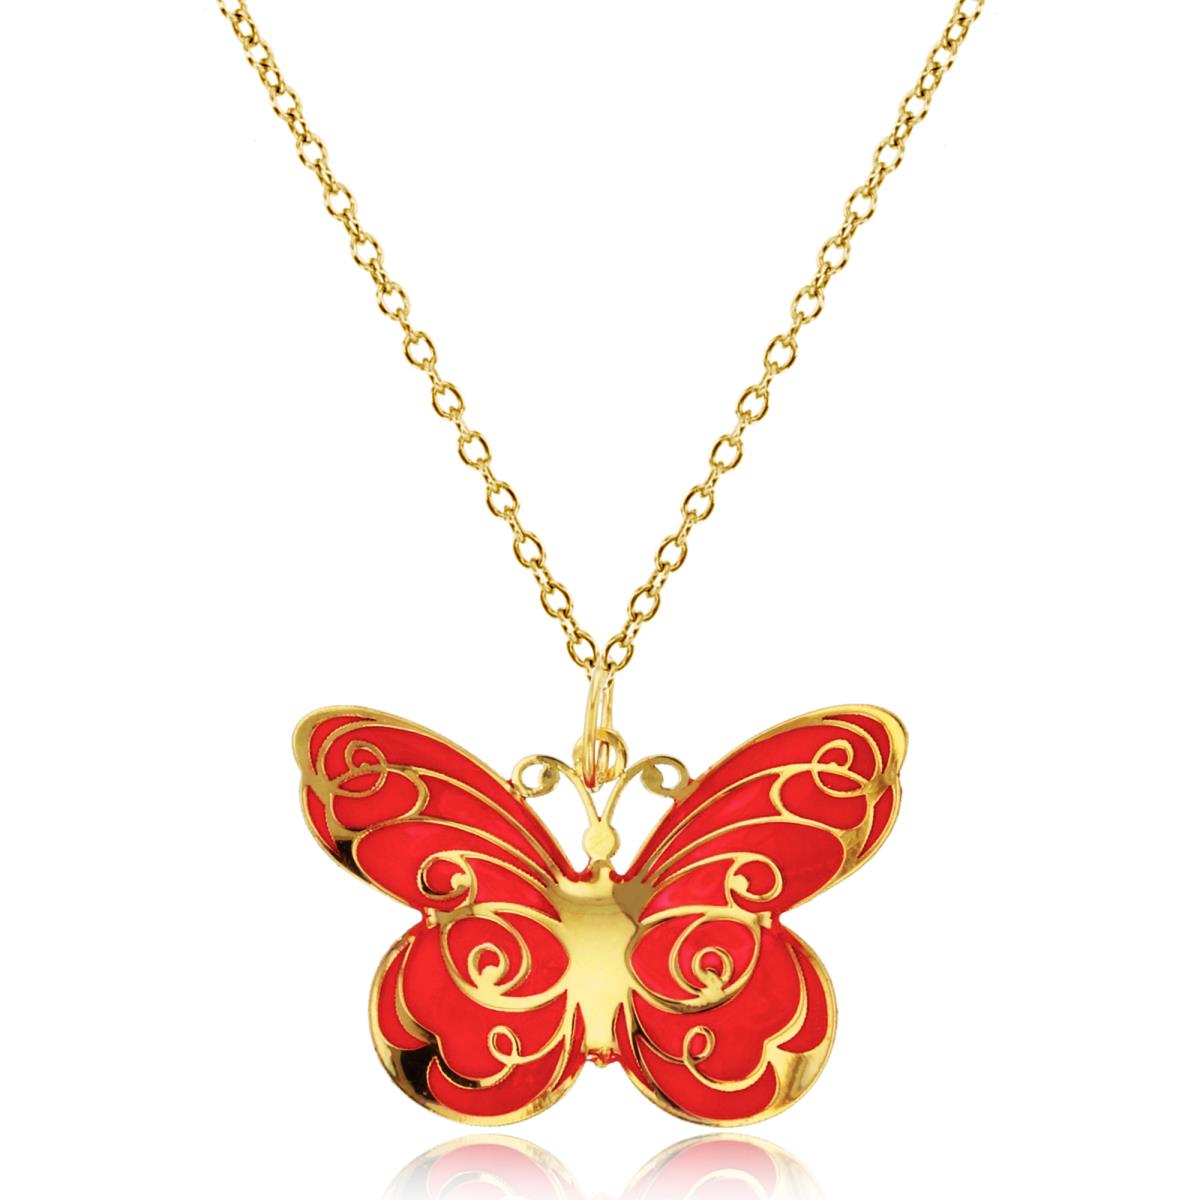 10K Yellow Gold Red Enamel 25x20mm Butterfly 18" 020 Rollo Chain Necklace